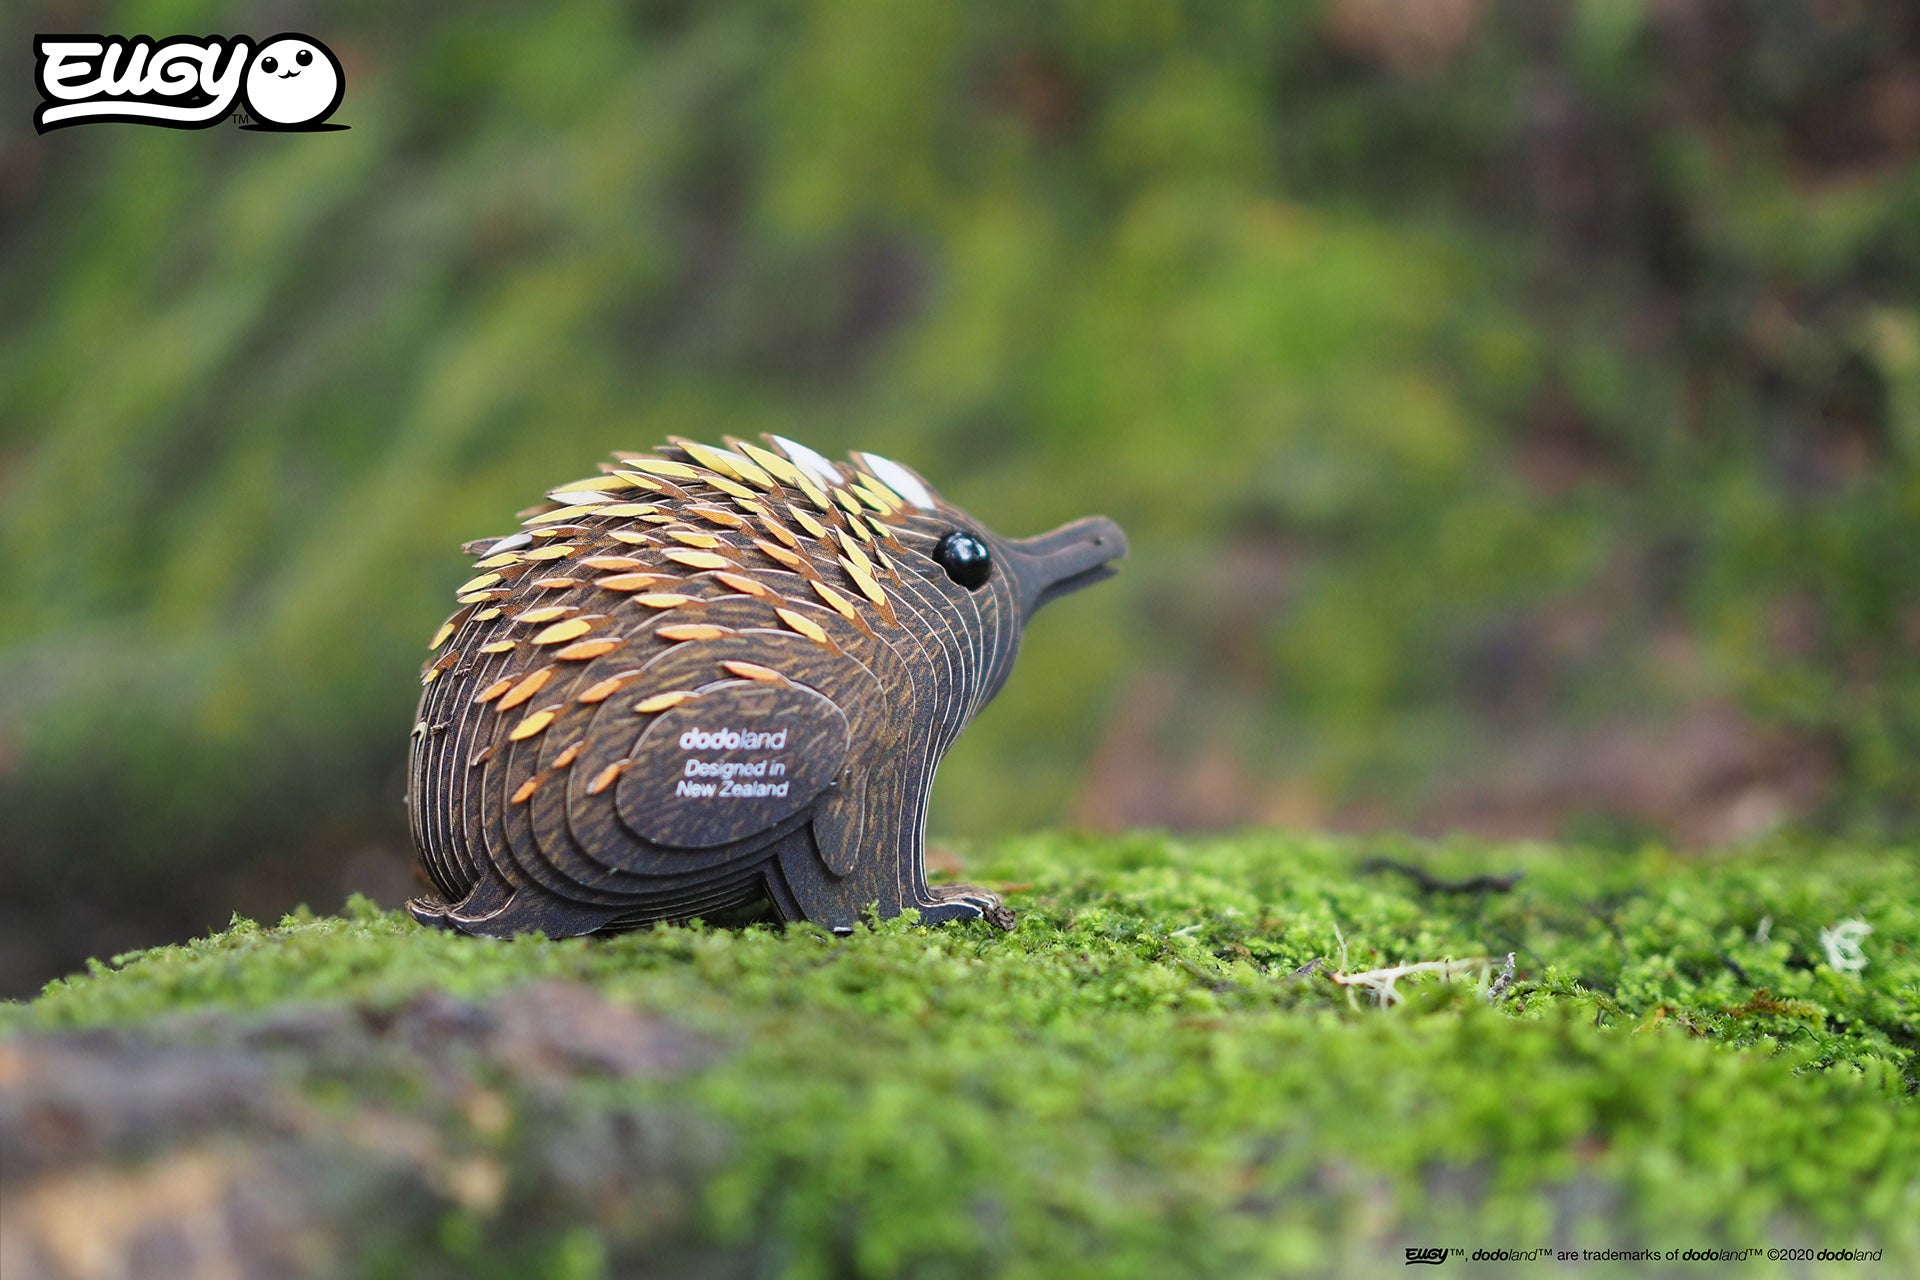 Image of an EUGY Echidna, facing right on an angle & sitting on a mossy log in front of a blurred green background